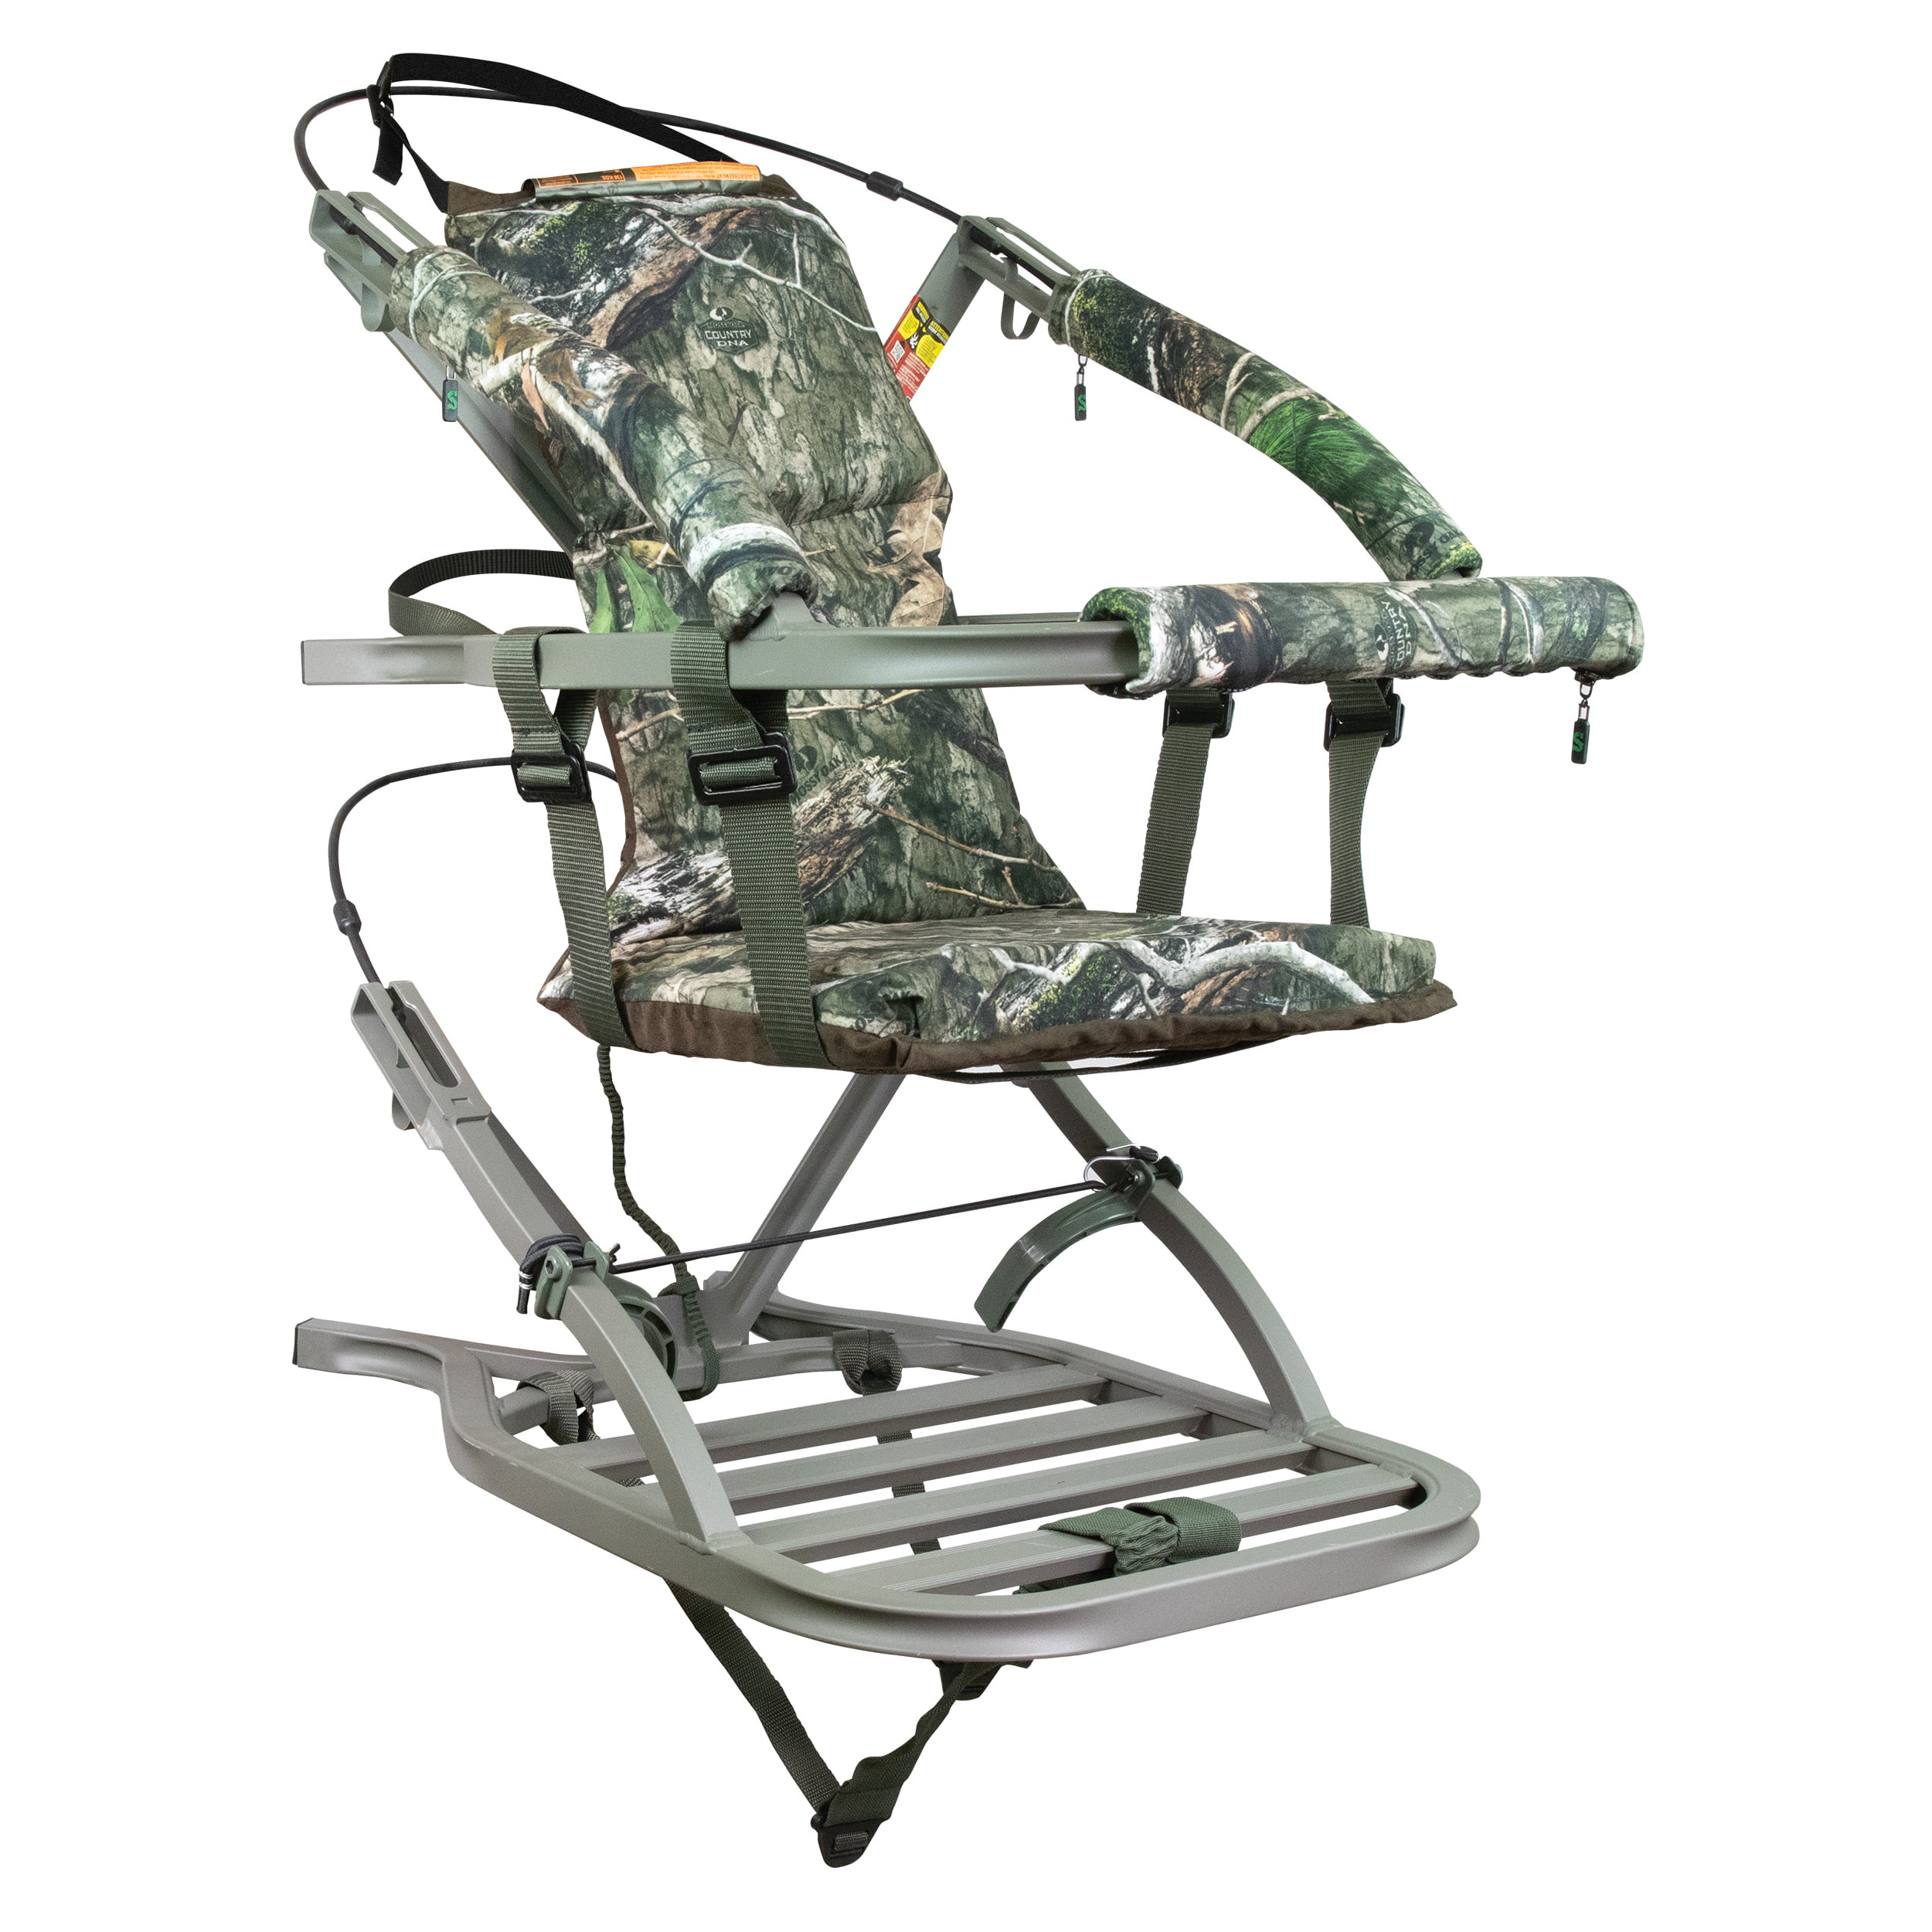 Summit Treestands 81115 Climbing Stand for sale online 